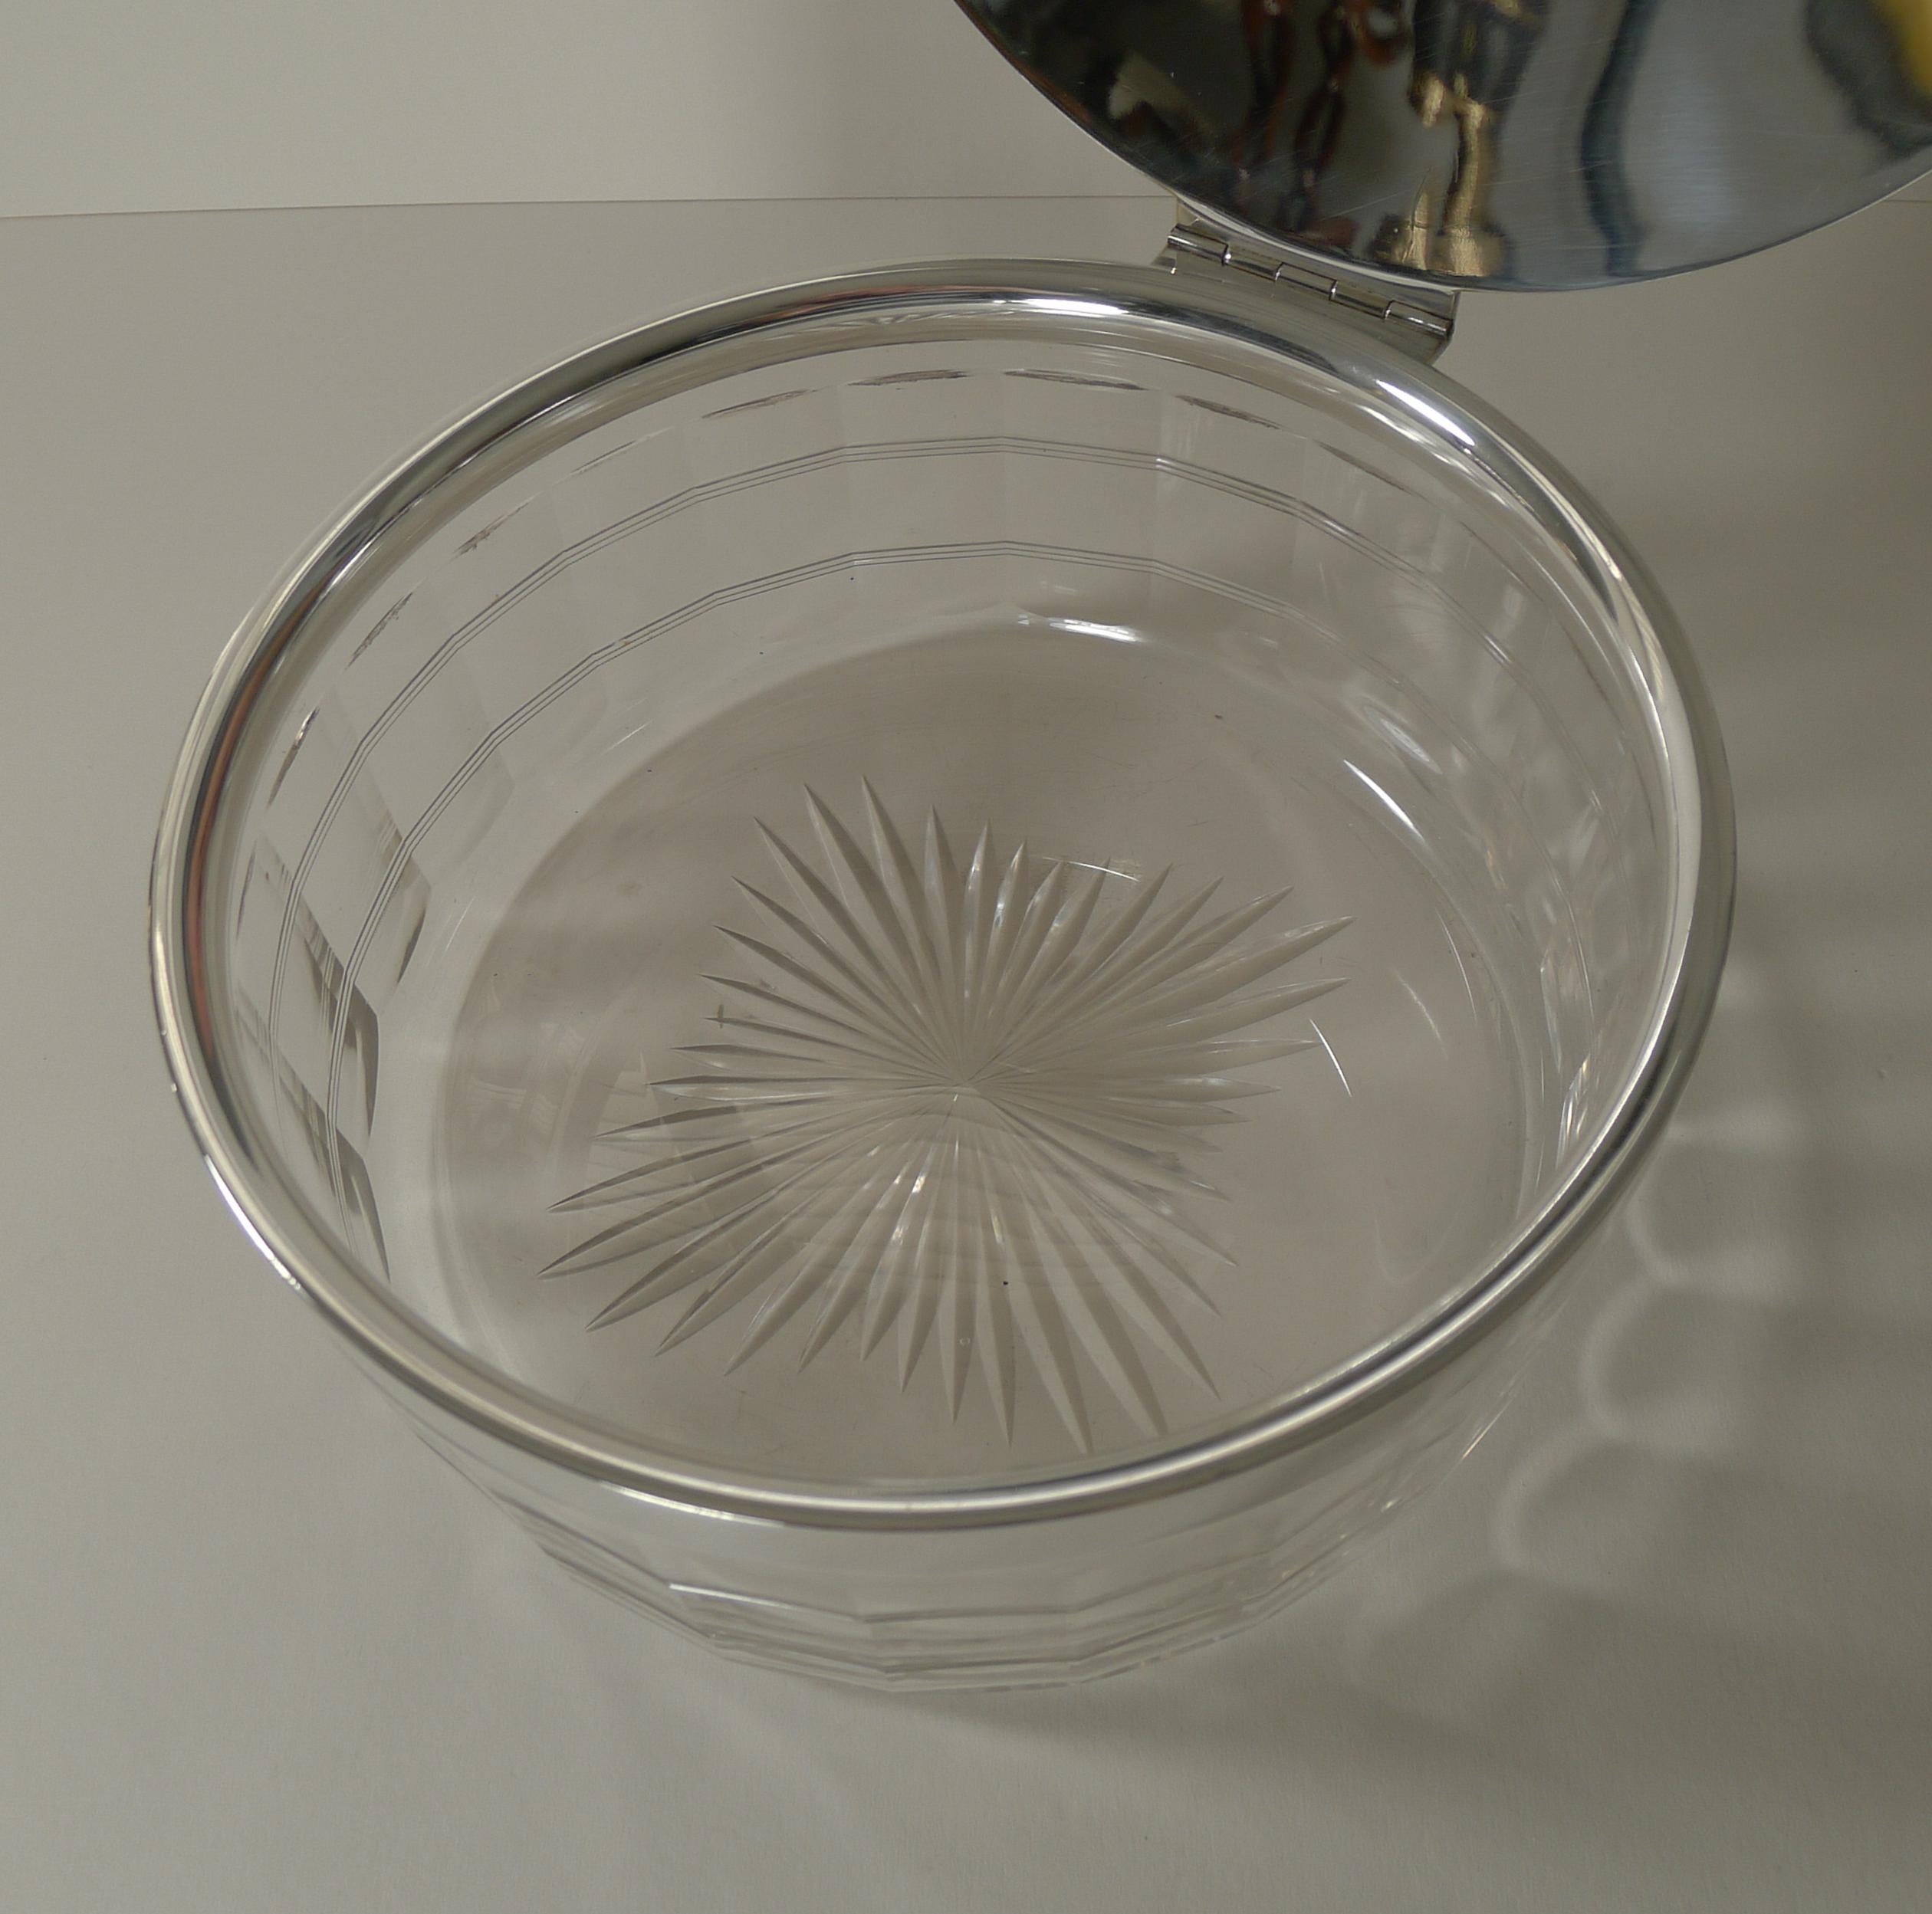 Unusual Scottish Cut Glass and Silver Plated Lidded Serving Dish c.1920 For Sale 1